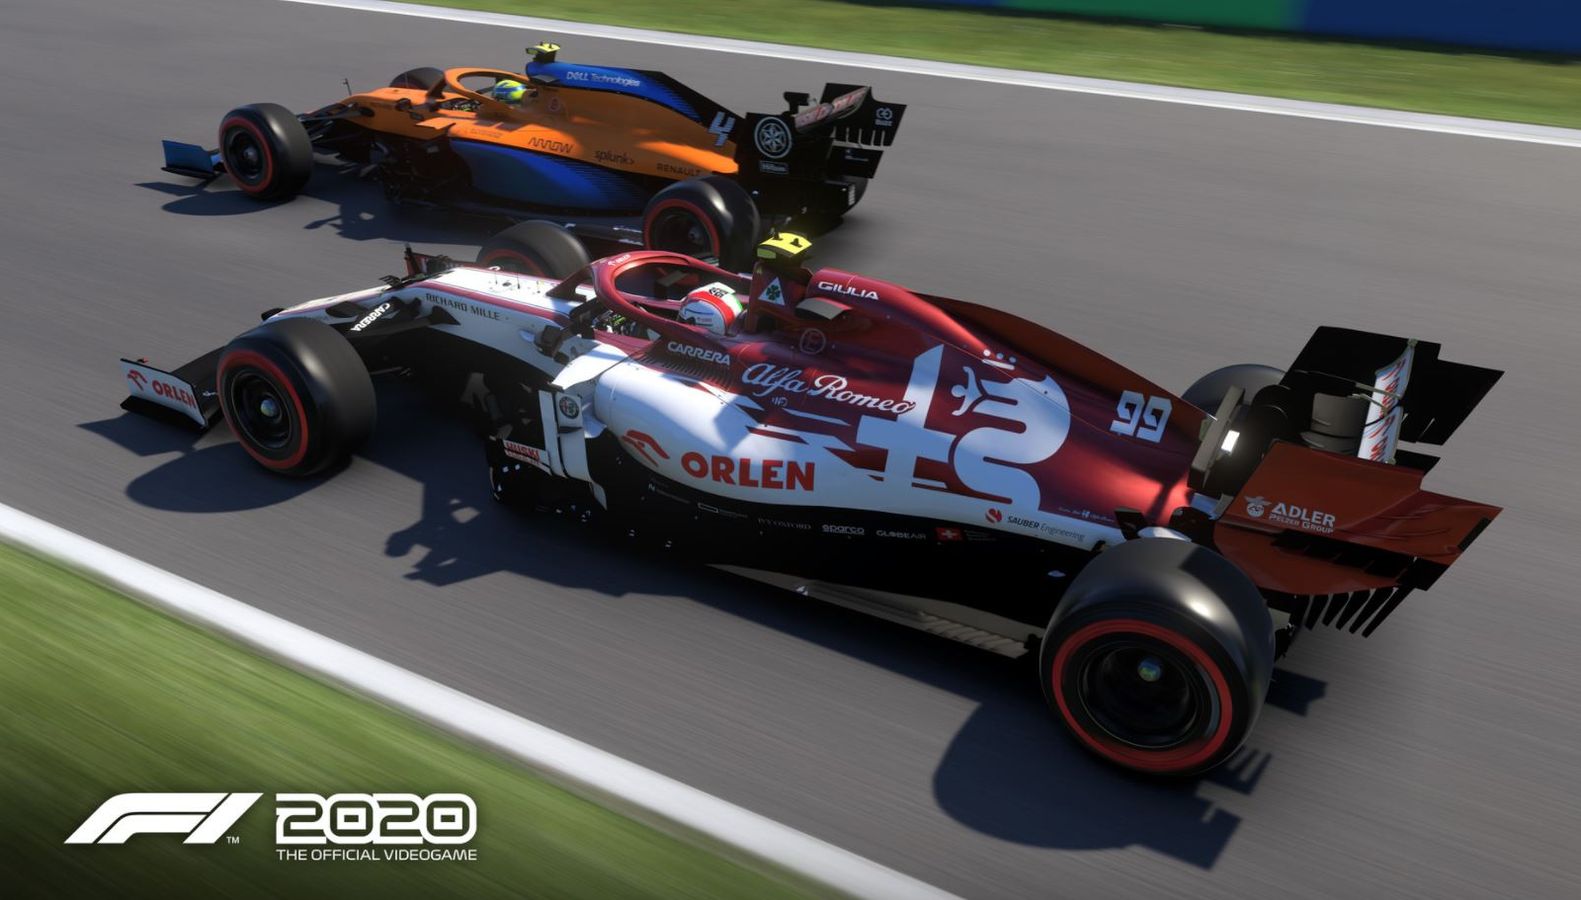 f1 2020 game